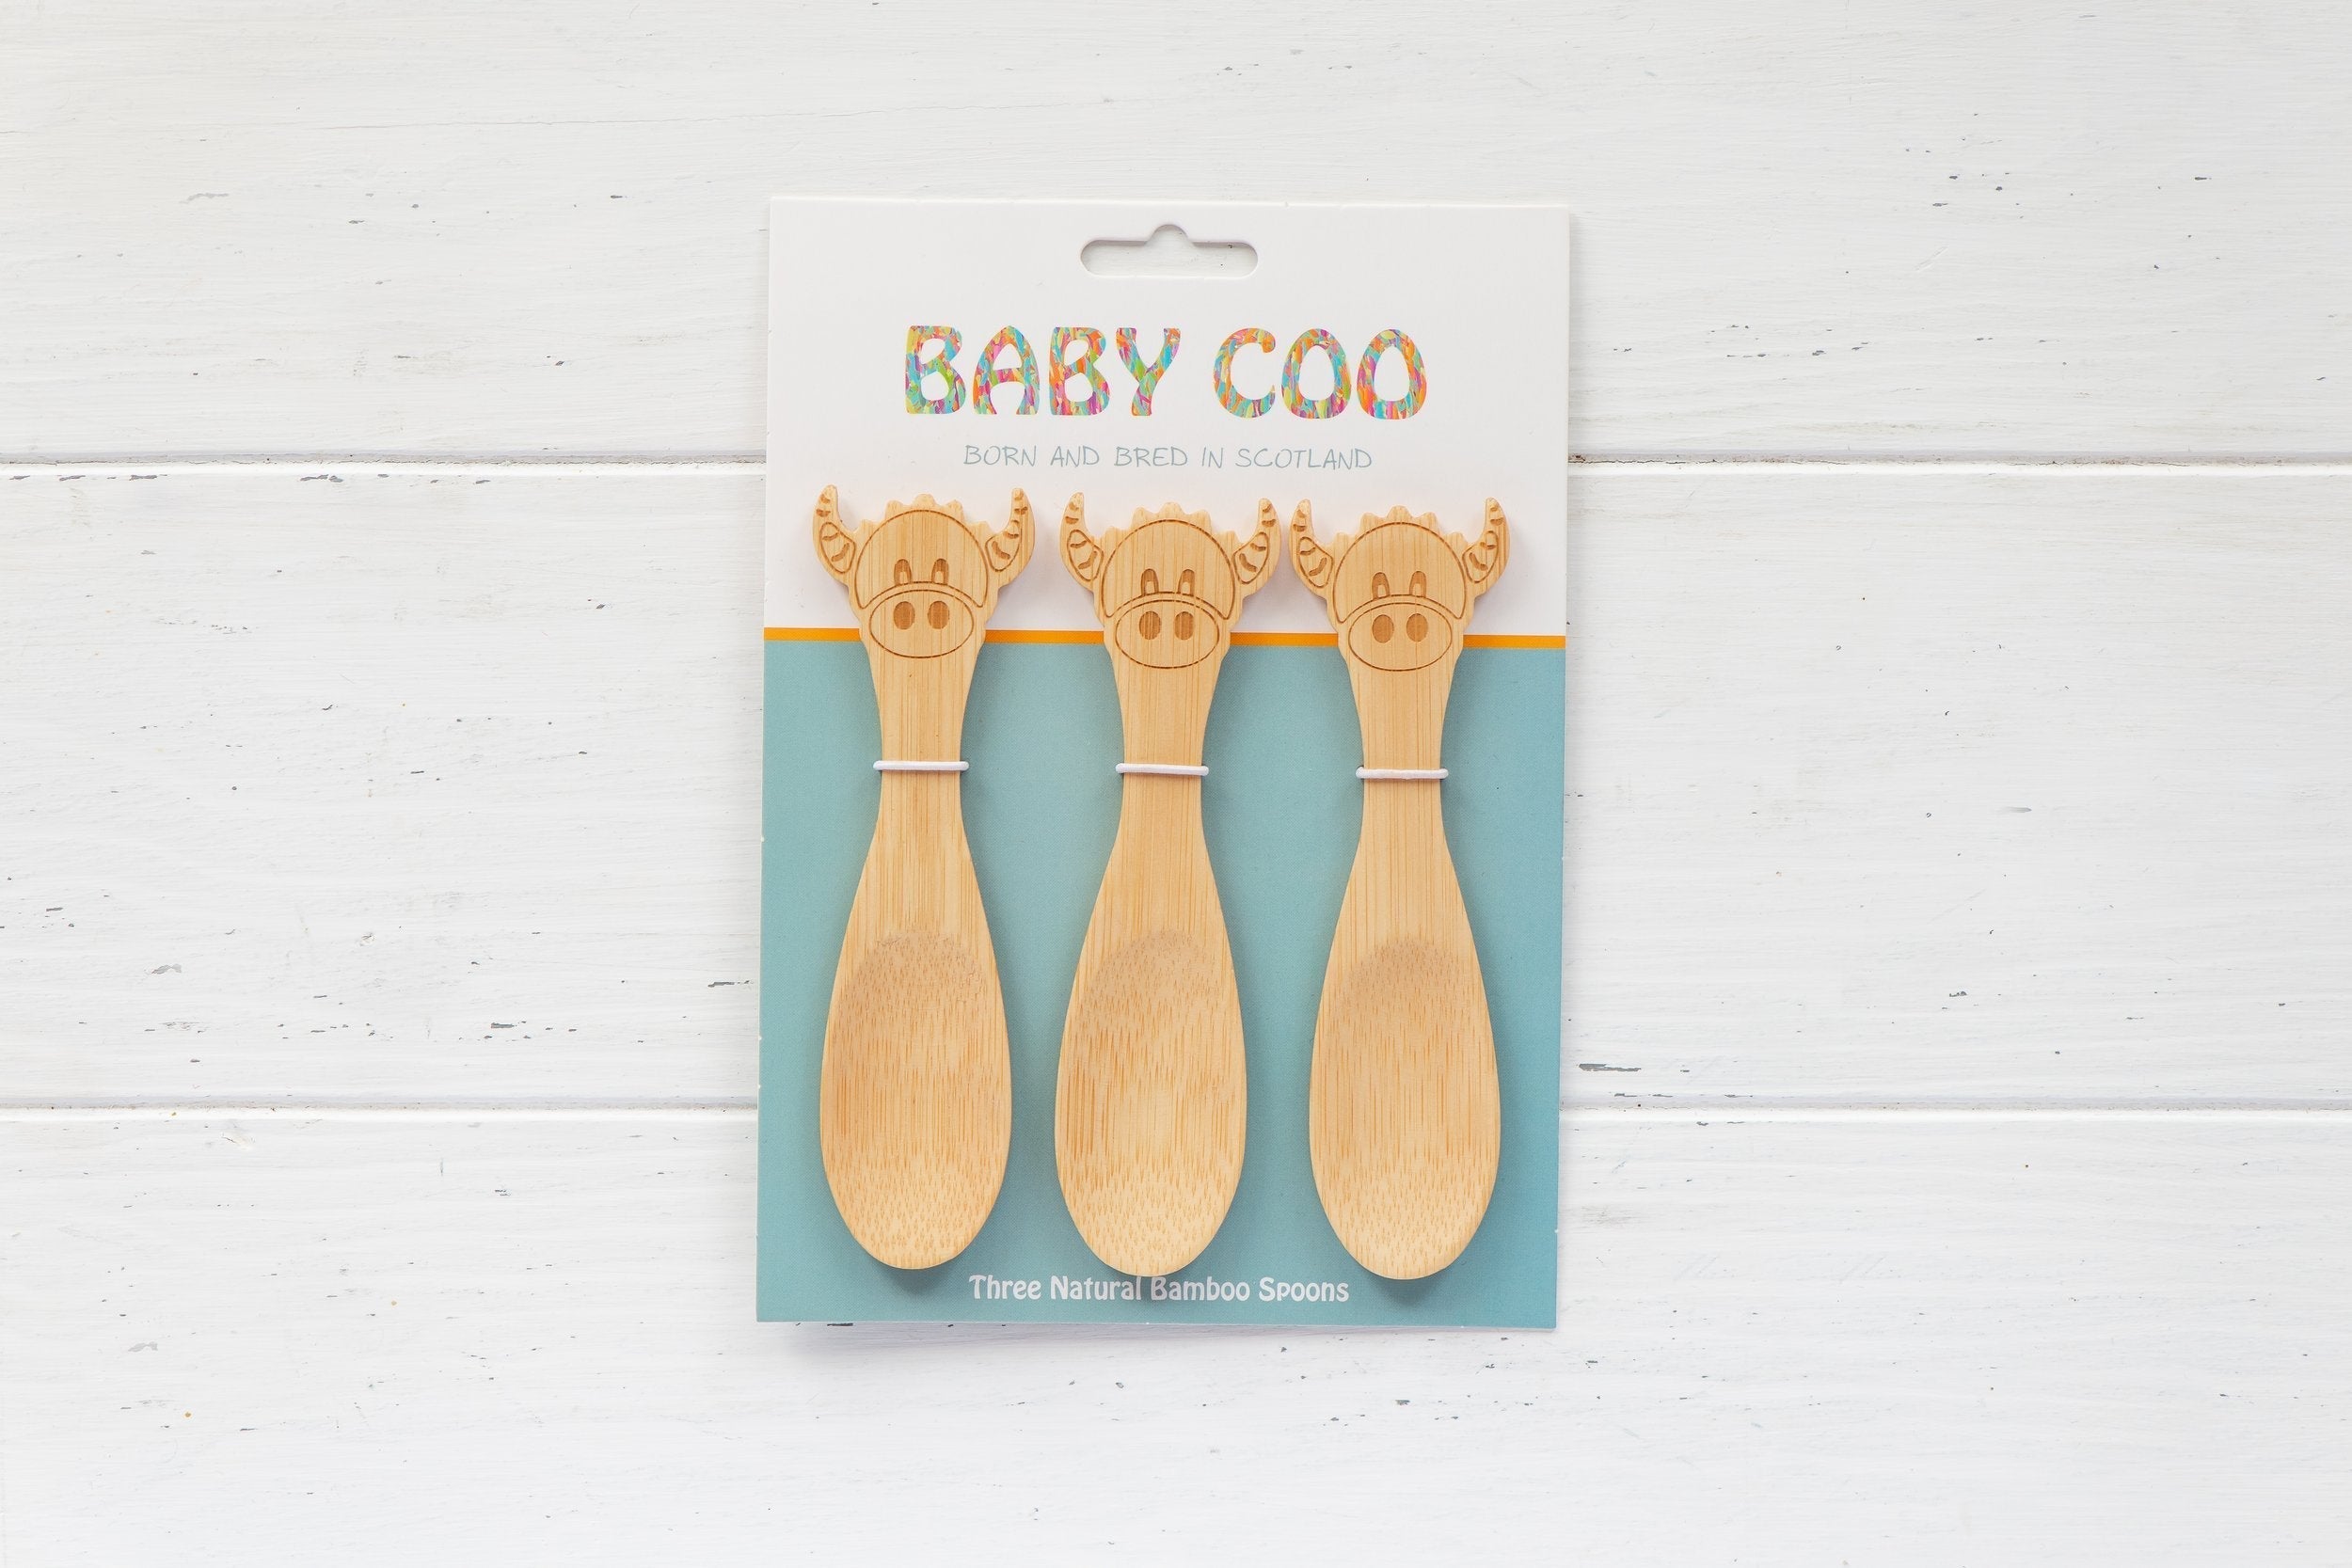 Baby Coo Bamboo Spoons | Hairy Coo | Scottish Creations